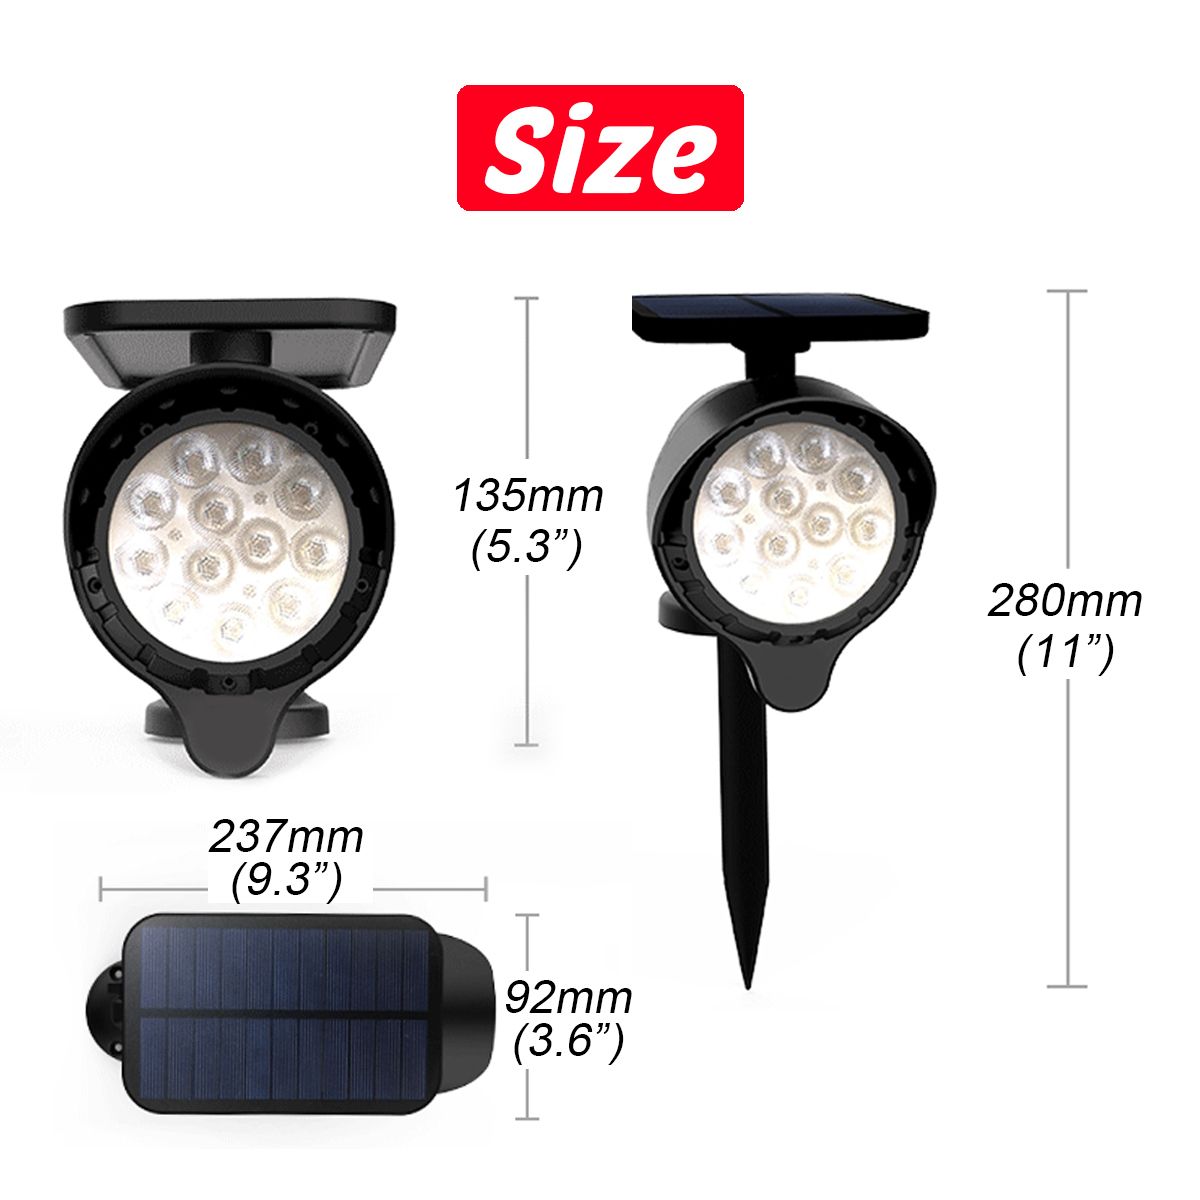 Waterproof-LED-Solar-Lawn-Light-ColorfulWarm-WhiteWhite-Outdoor-Wall-Ground-Garden-Pathway-Security--1724544